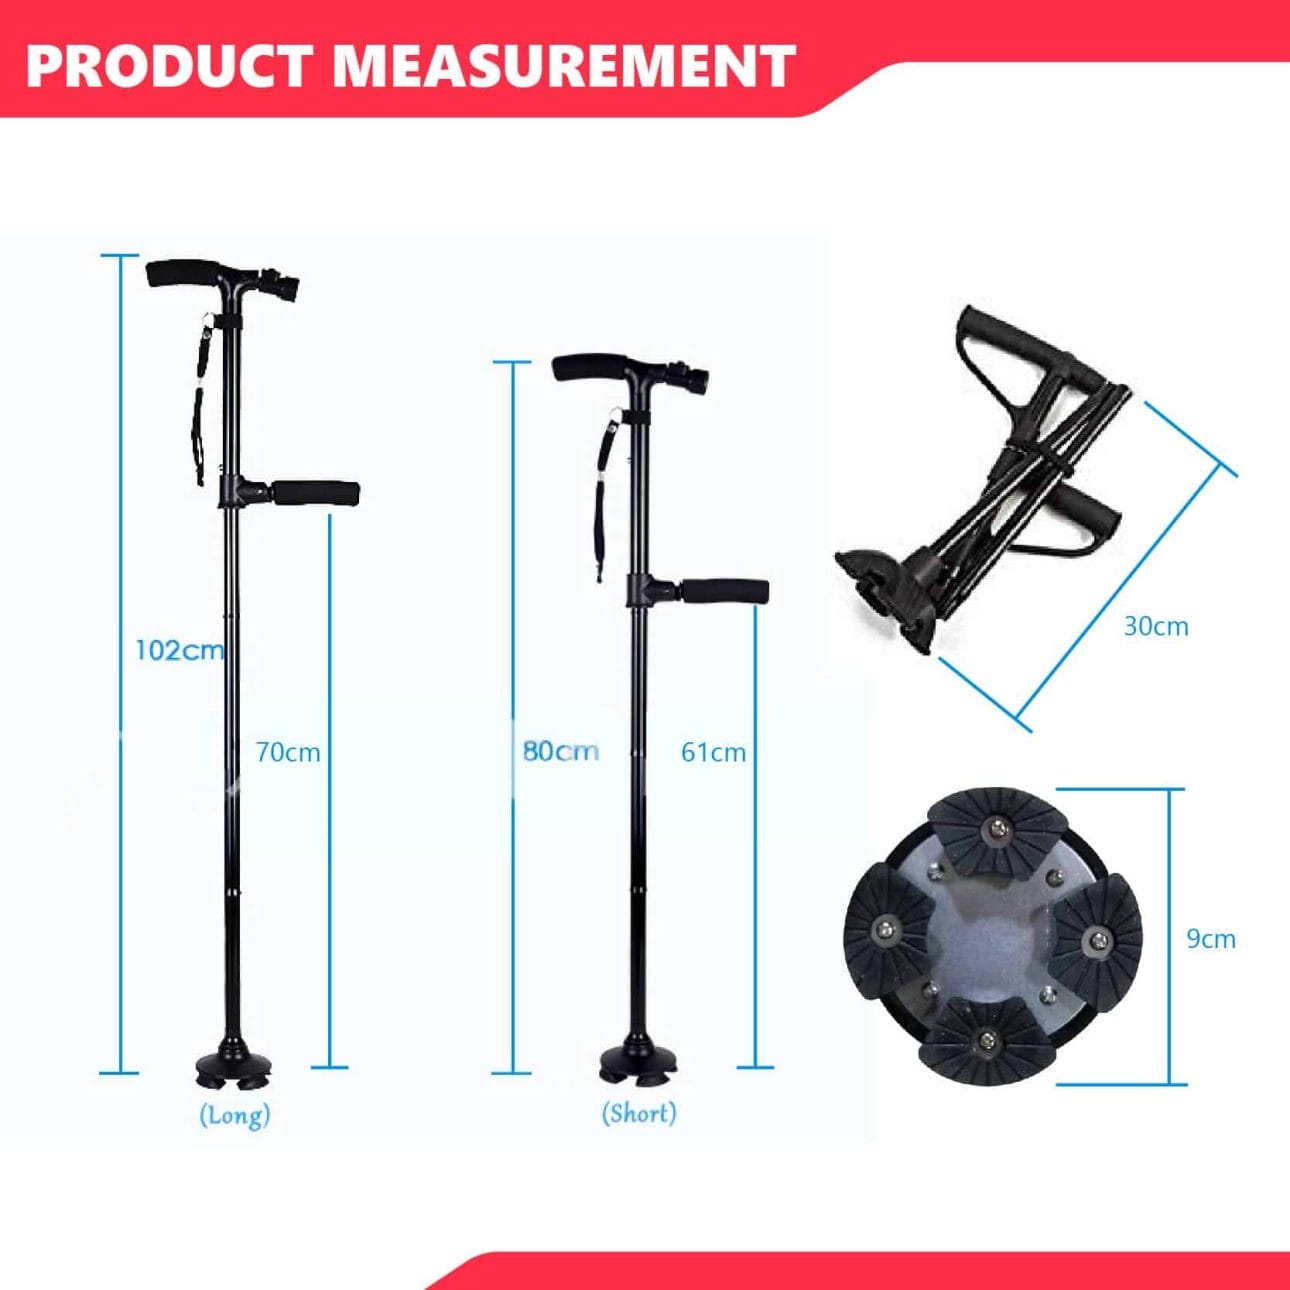 High Rise Walking Stick with Build-in LED - Demo Measurement